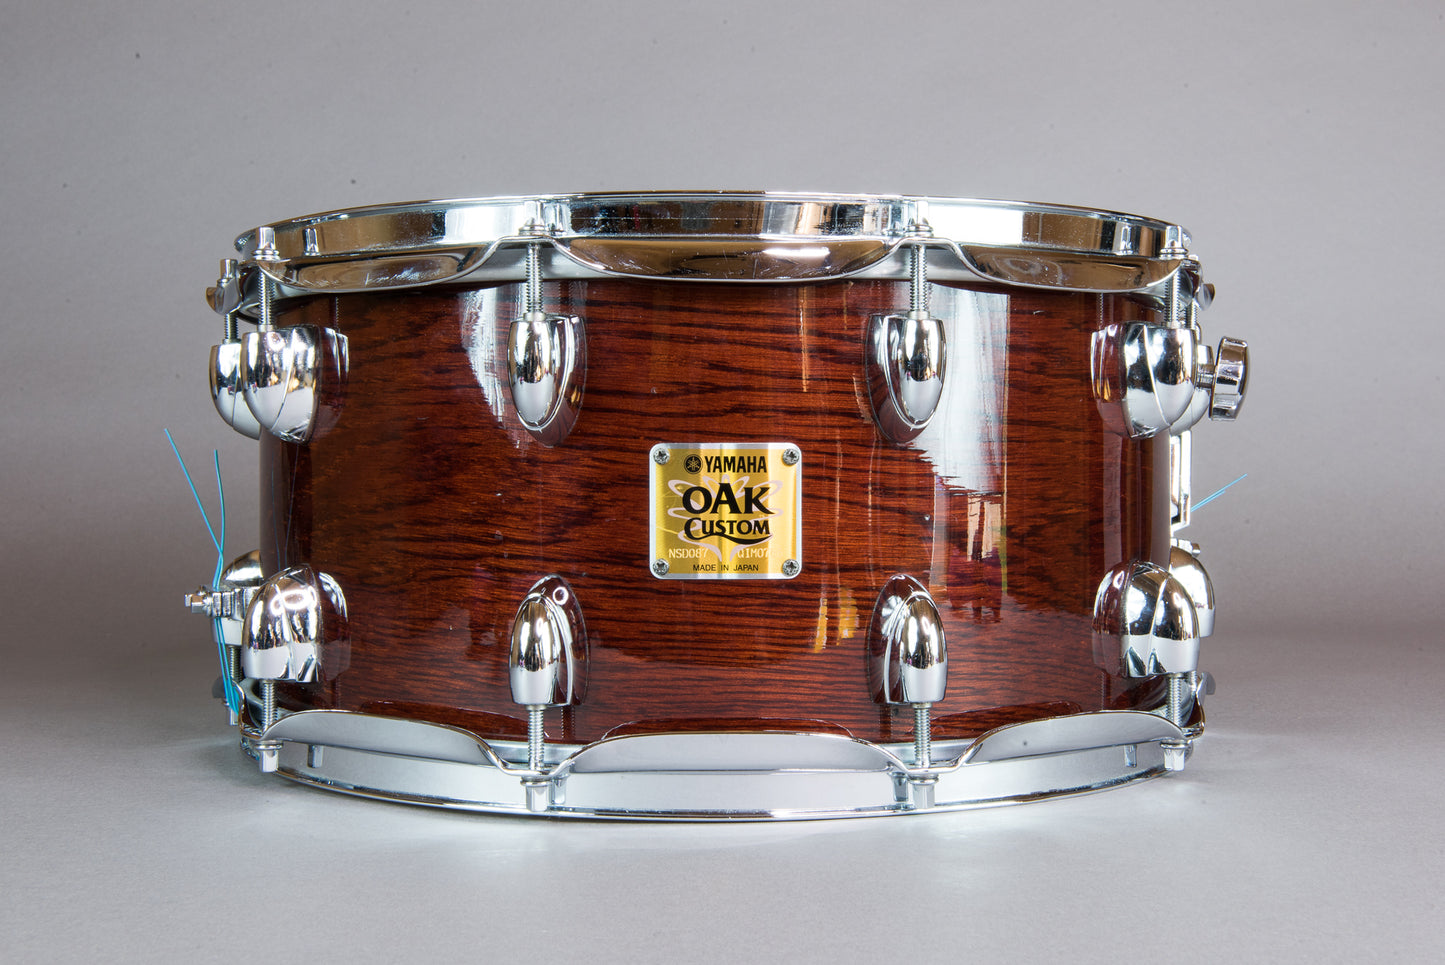 Yamaha 14" x 7" Gold Badge Oak Snare Drum in Bryce Canyon